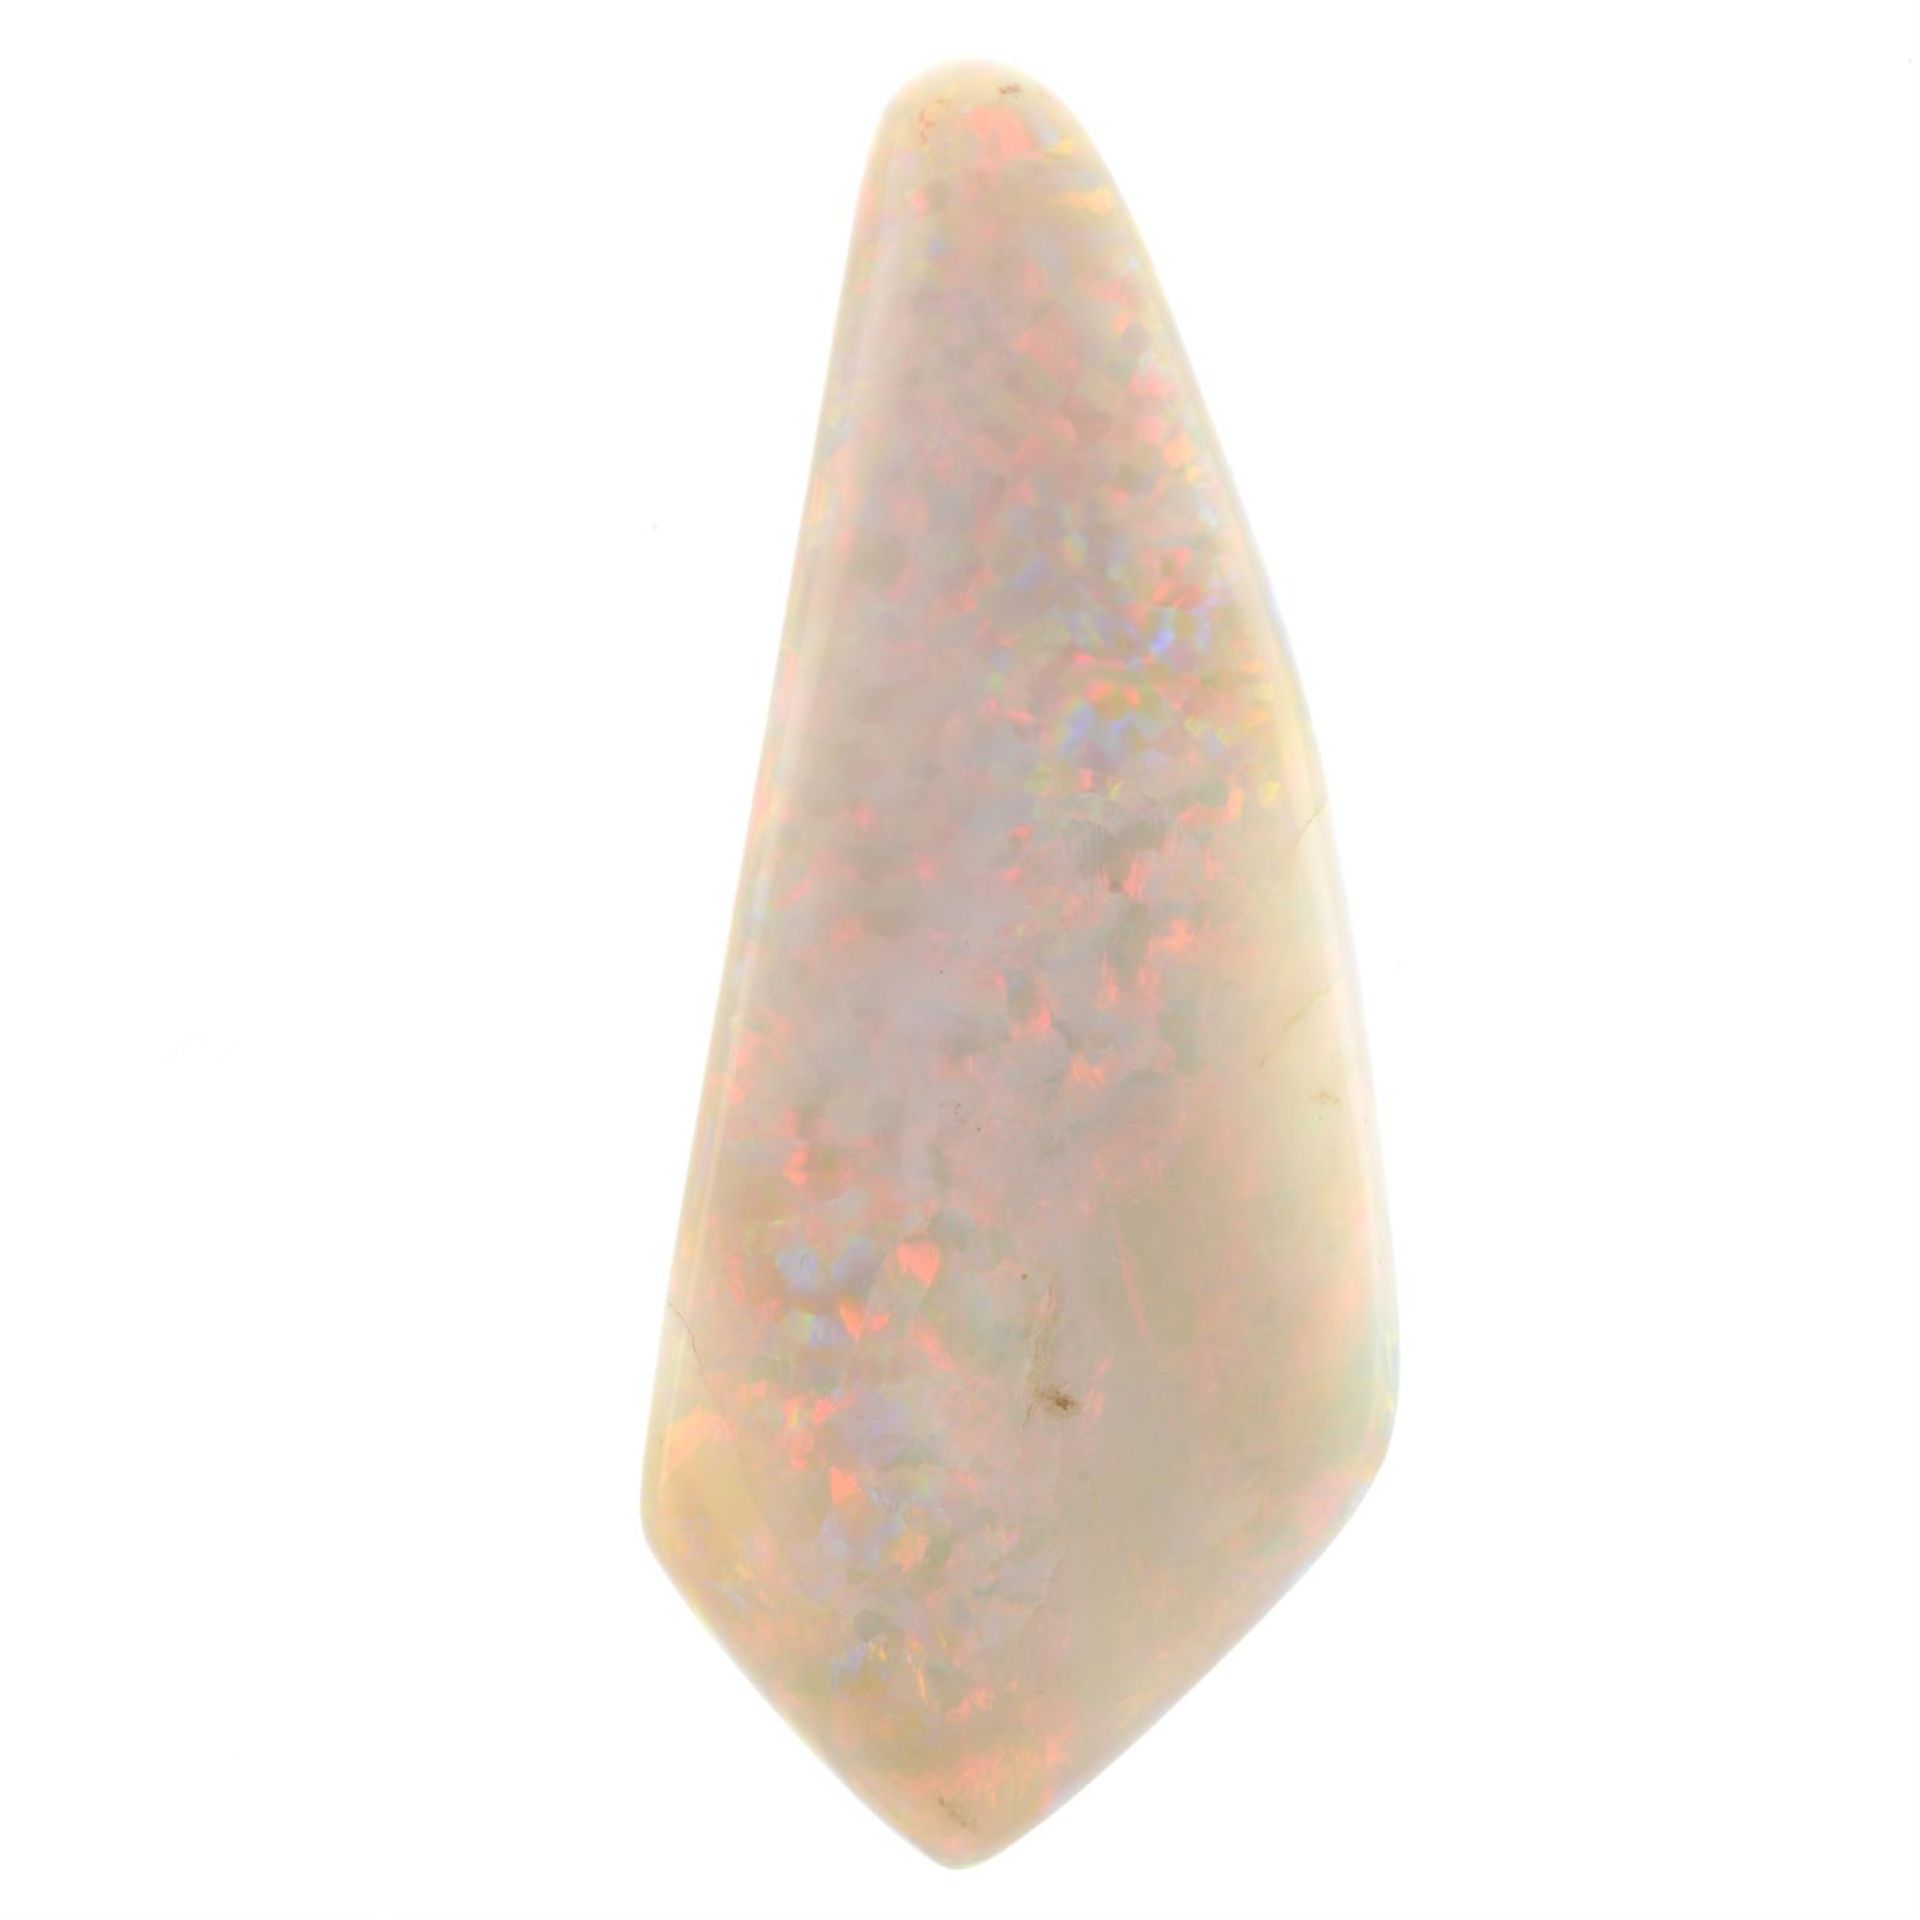 Free form opal, 102.10ct - Image 2 of 2